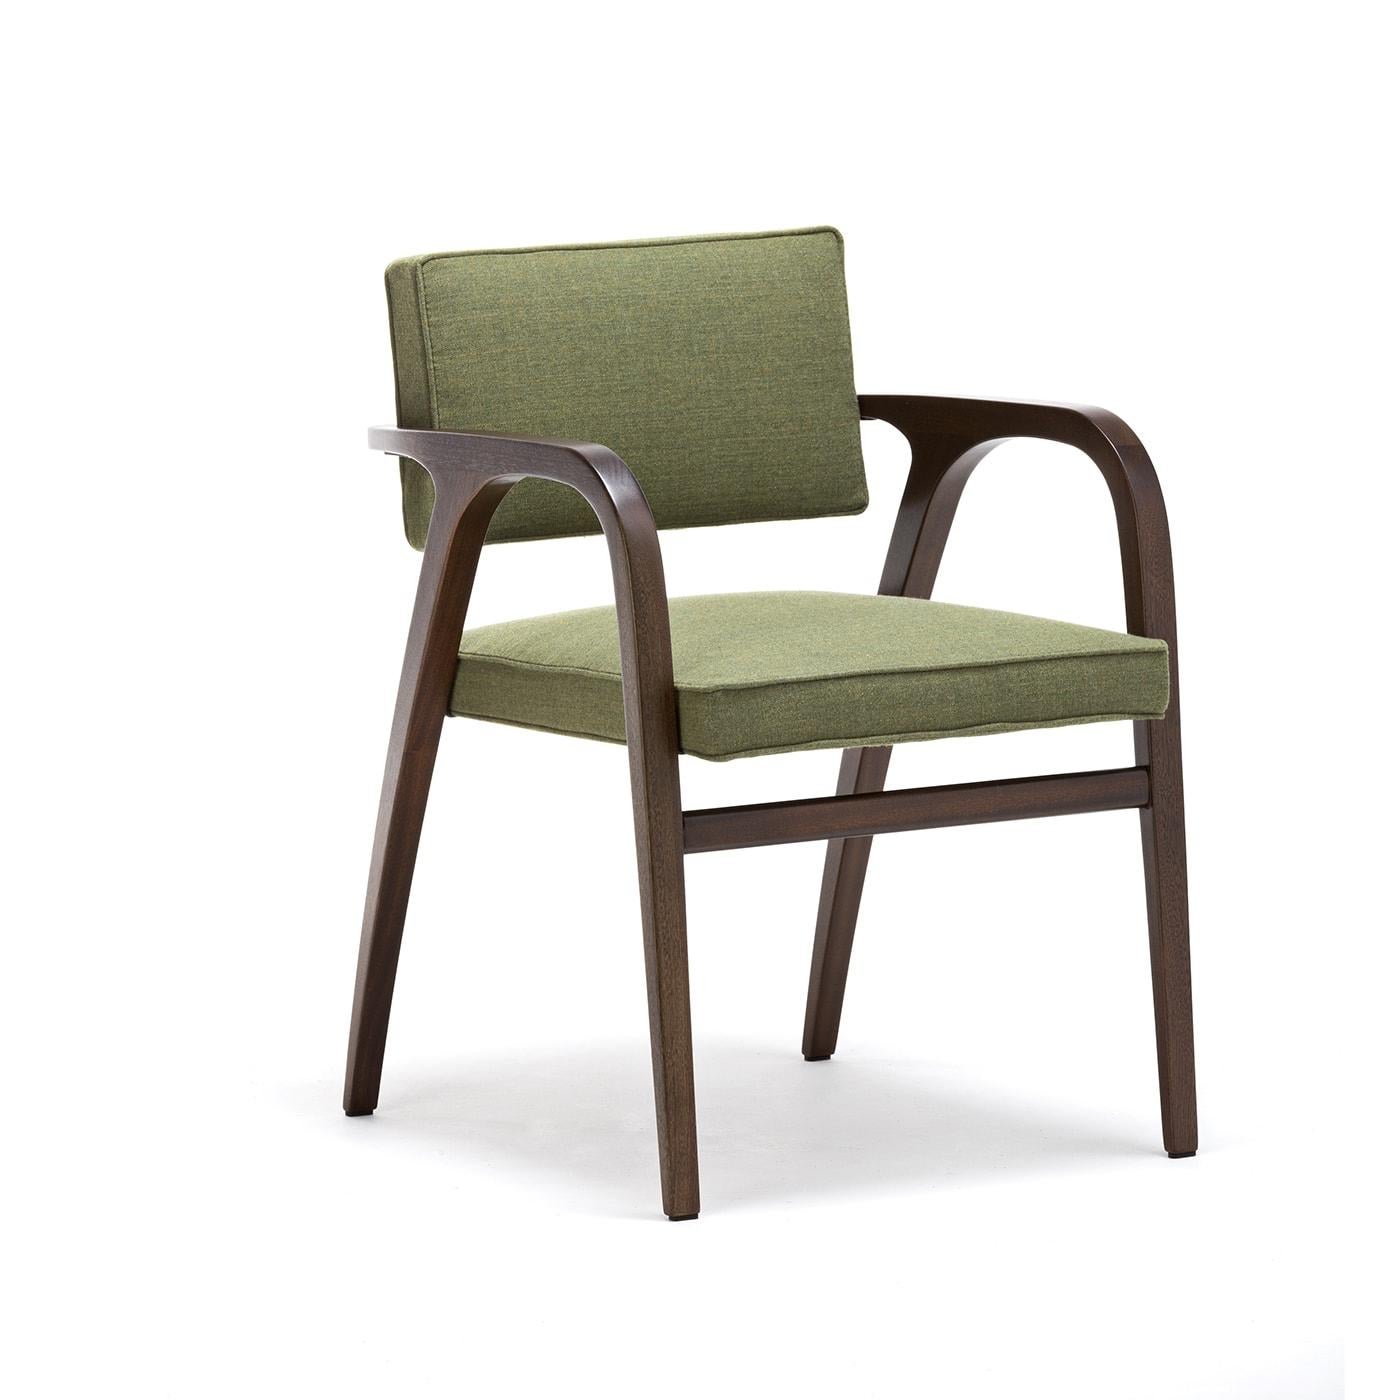 An iconic design distinguished by armrests that merge aesthetic beauty and functionality, this chair is a gorgeous piece by Franco Albini, a Rationalist architect from the 20th century. Fashioned of barrique-finished mahogany, the sleek structure